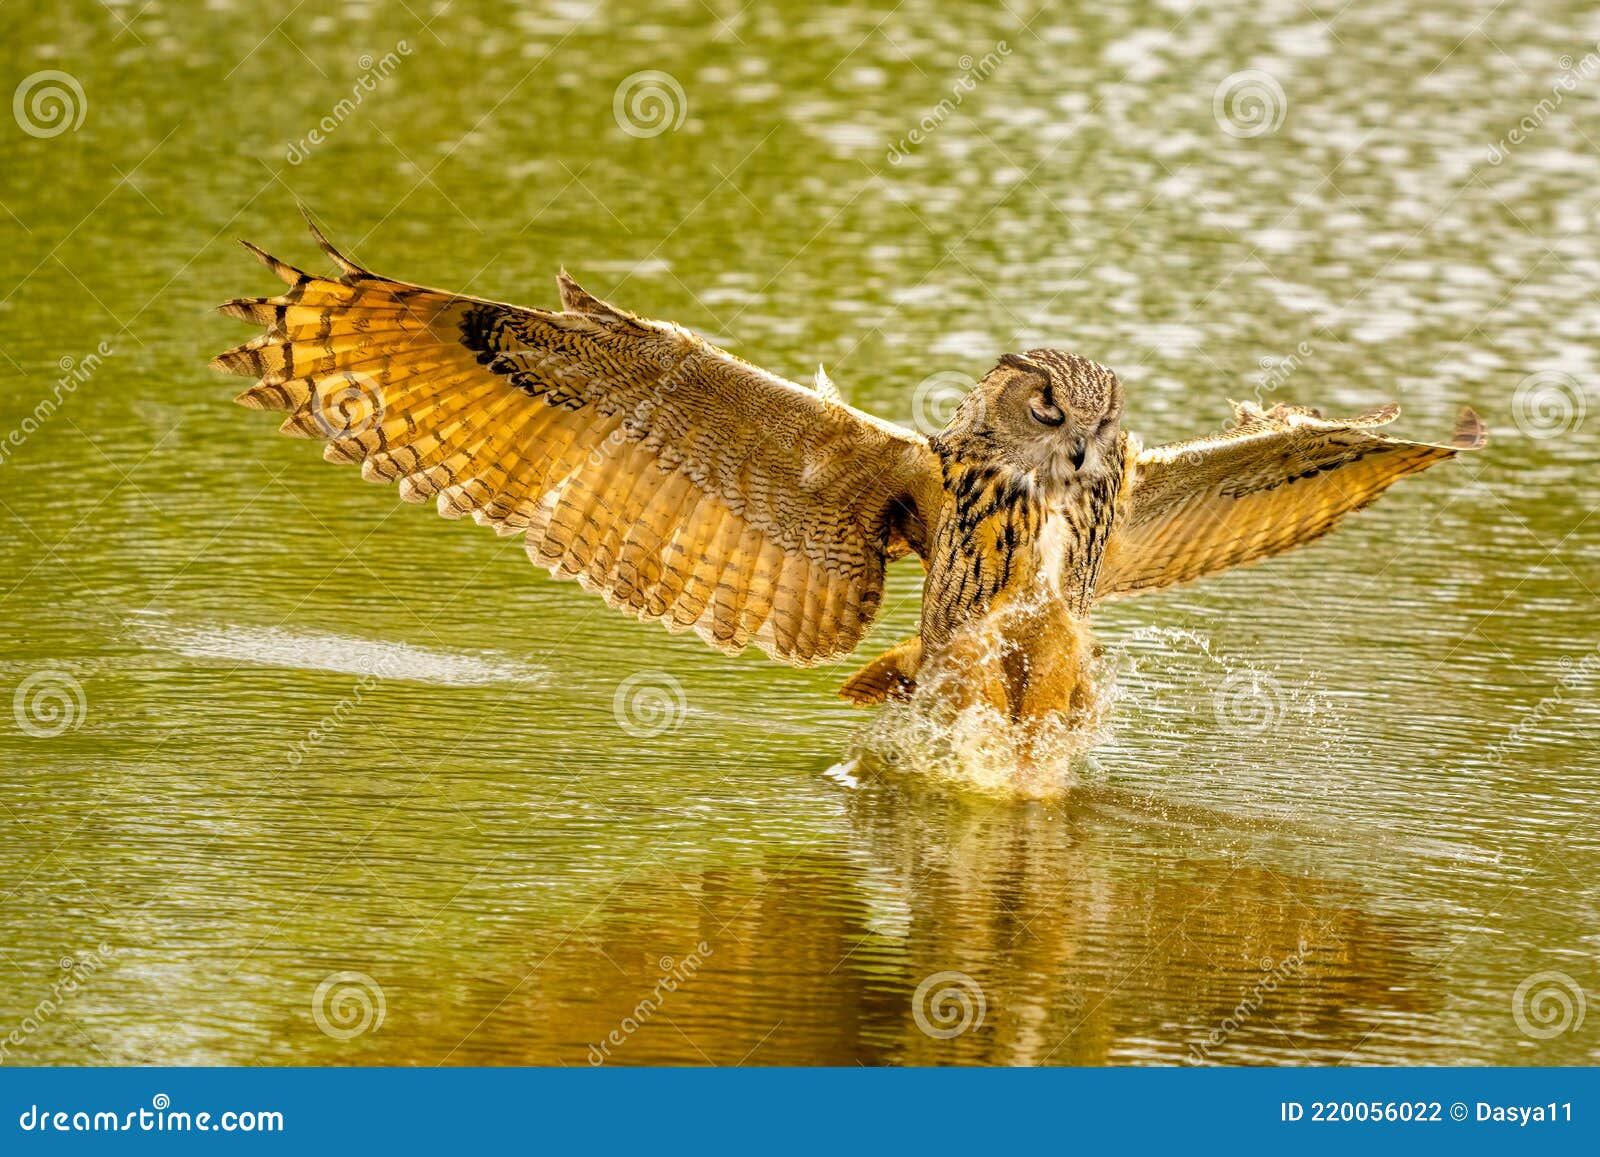 detailed close up of a wild eagle owl. the bird of prey flies with outspread wings just above the water of a lake. grabs